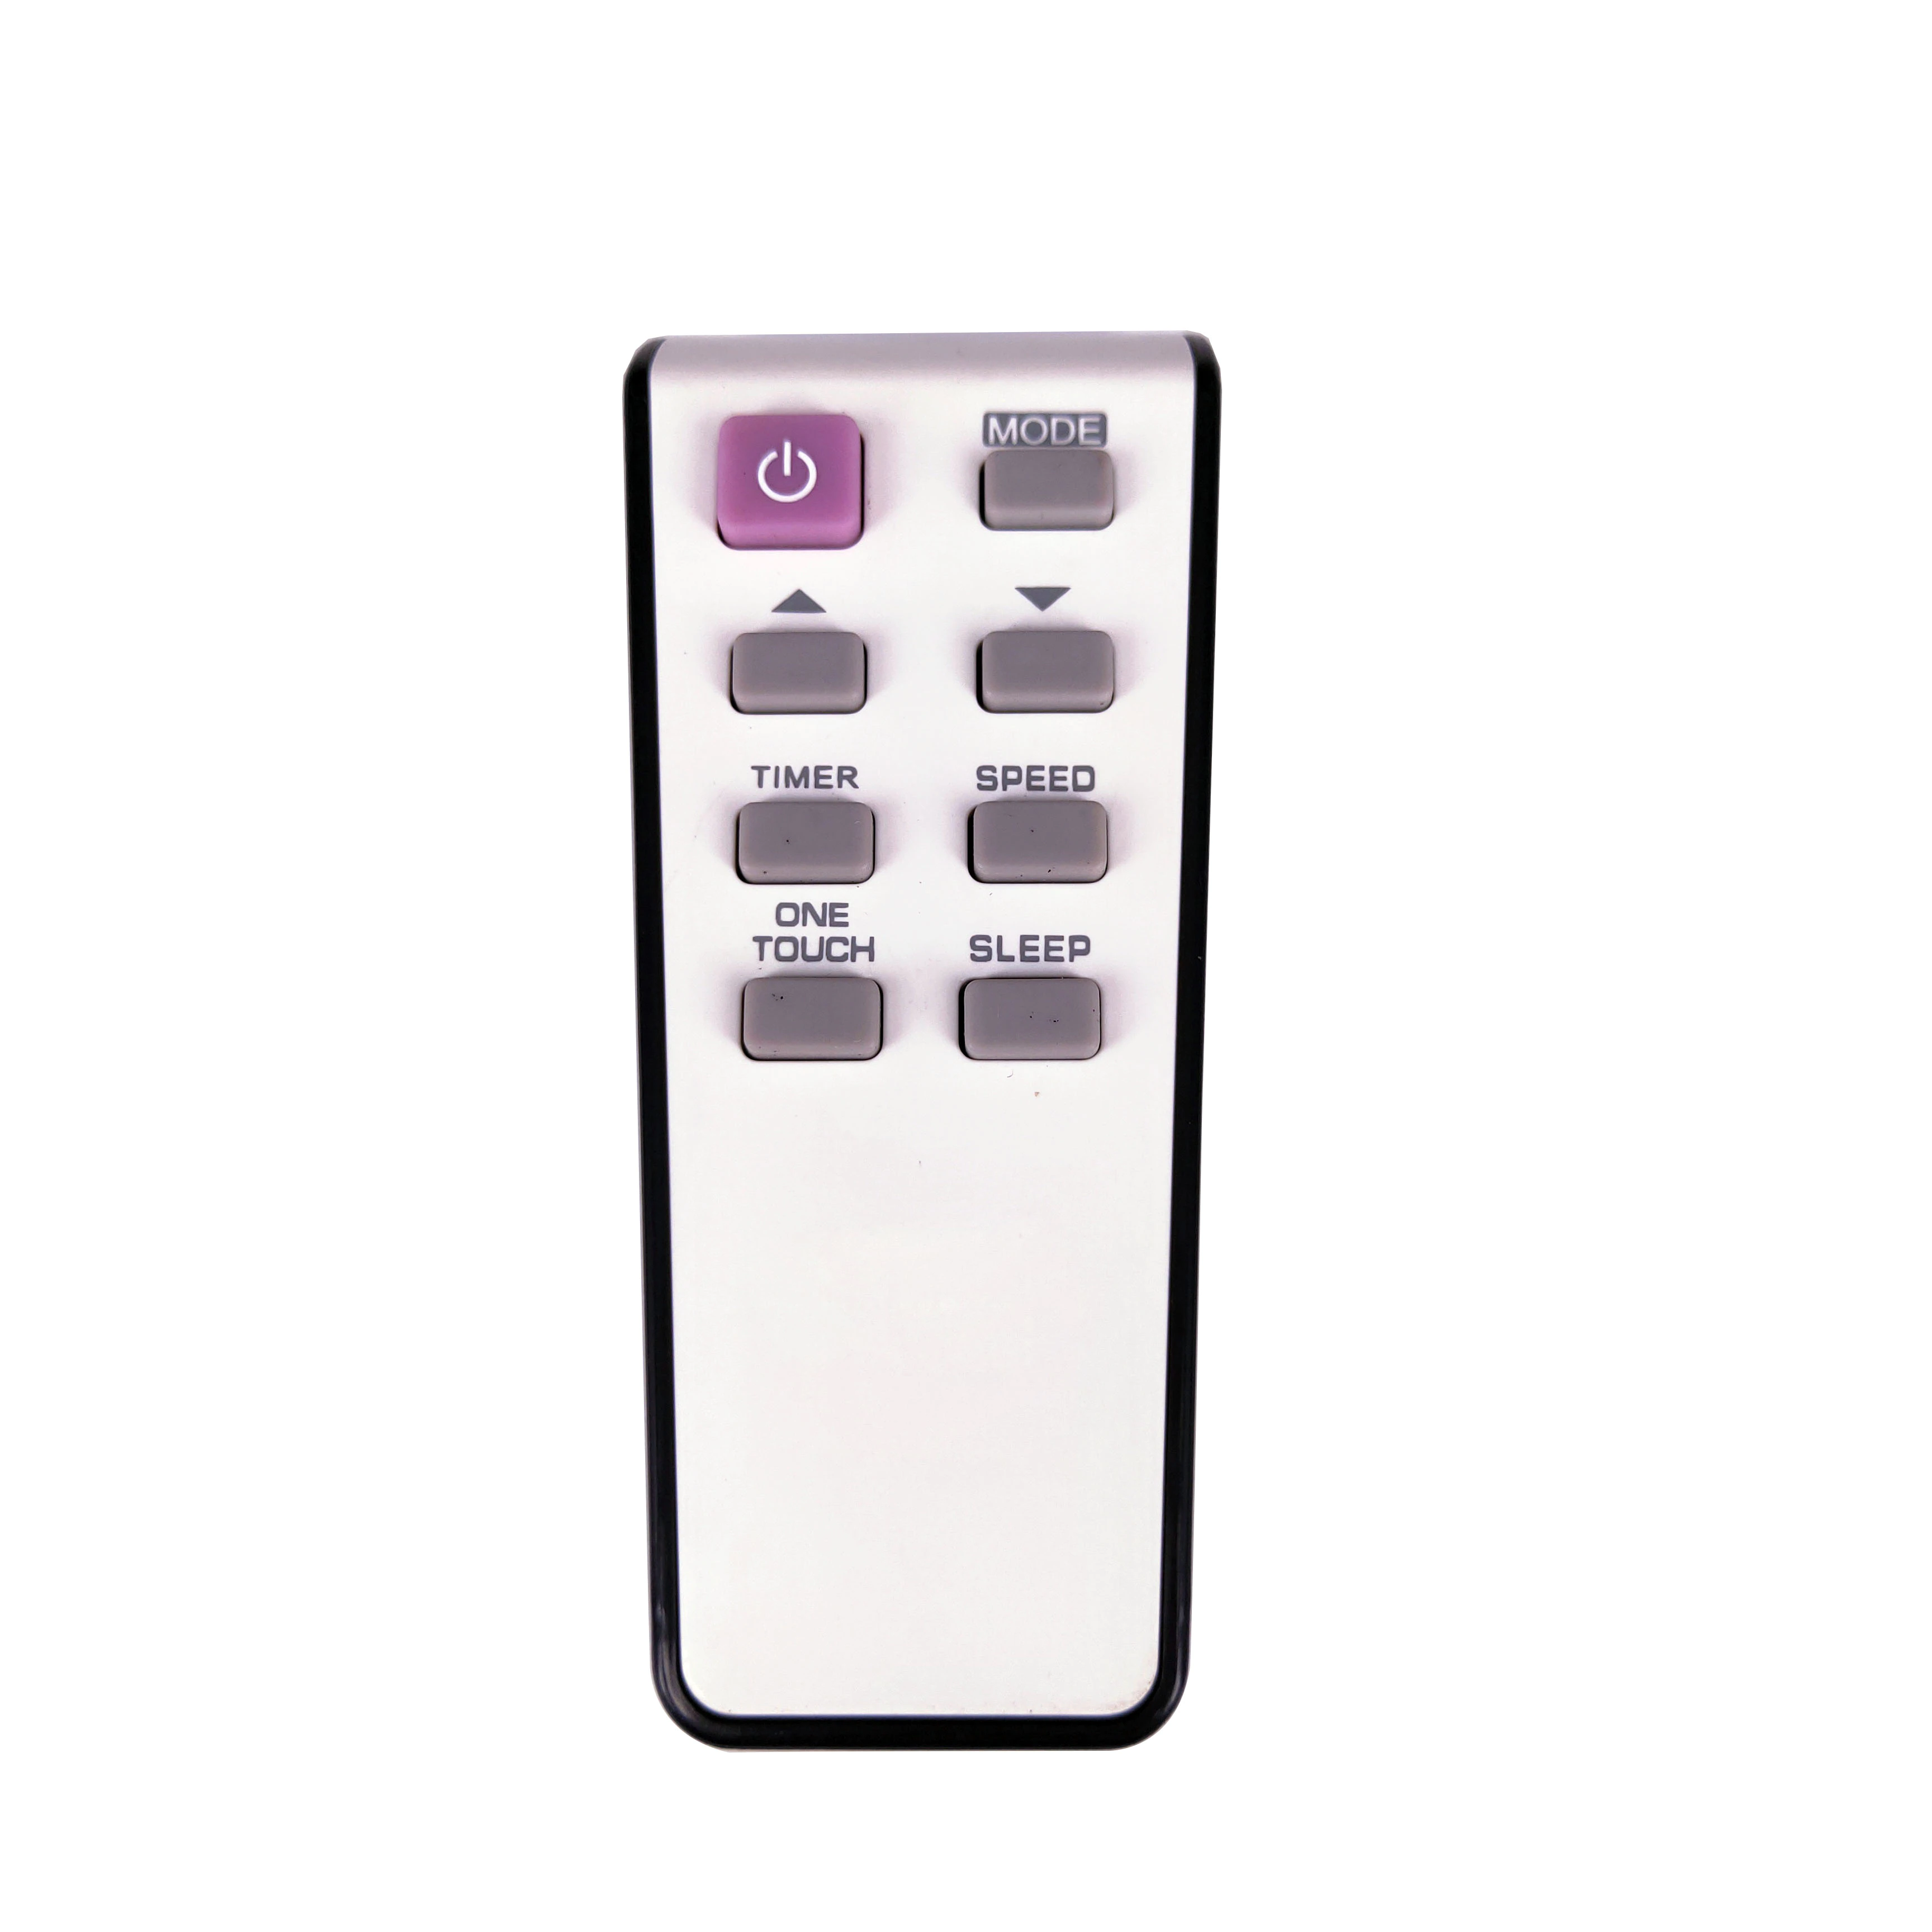 Replacement Remote for Comfort-Aire - Model: Rg32a/e - China Air Conditioner Remotes :: Cheapest AC Remote Solutions